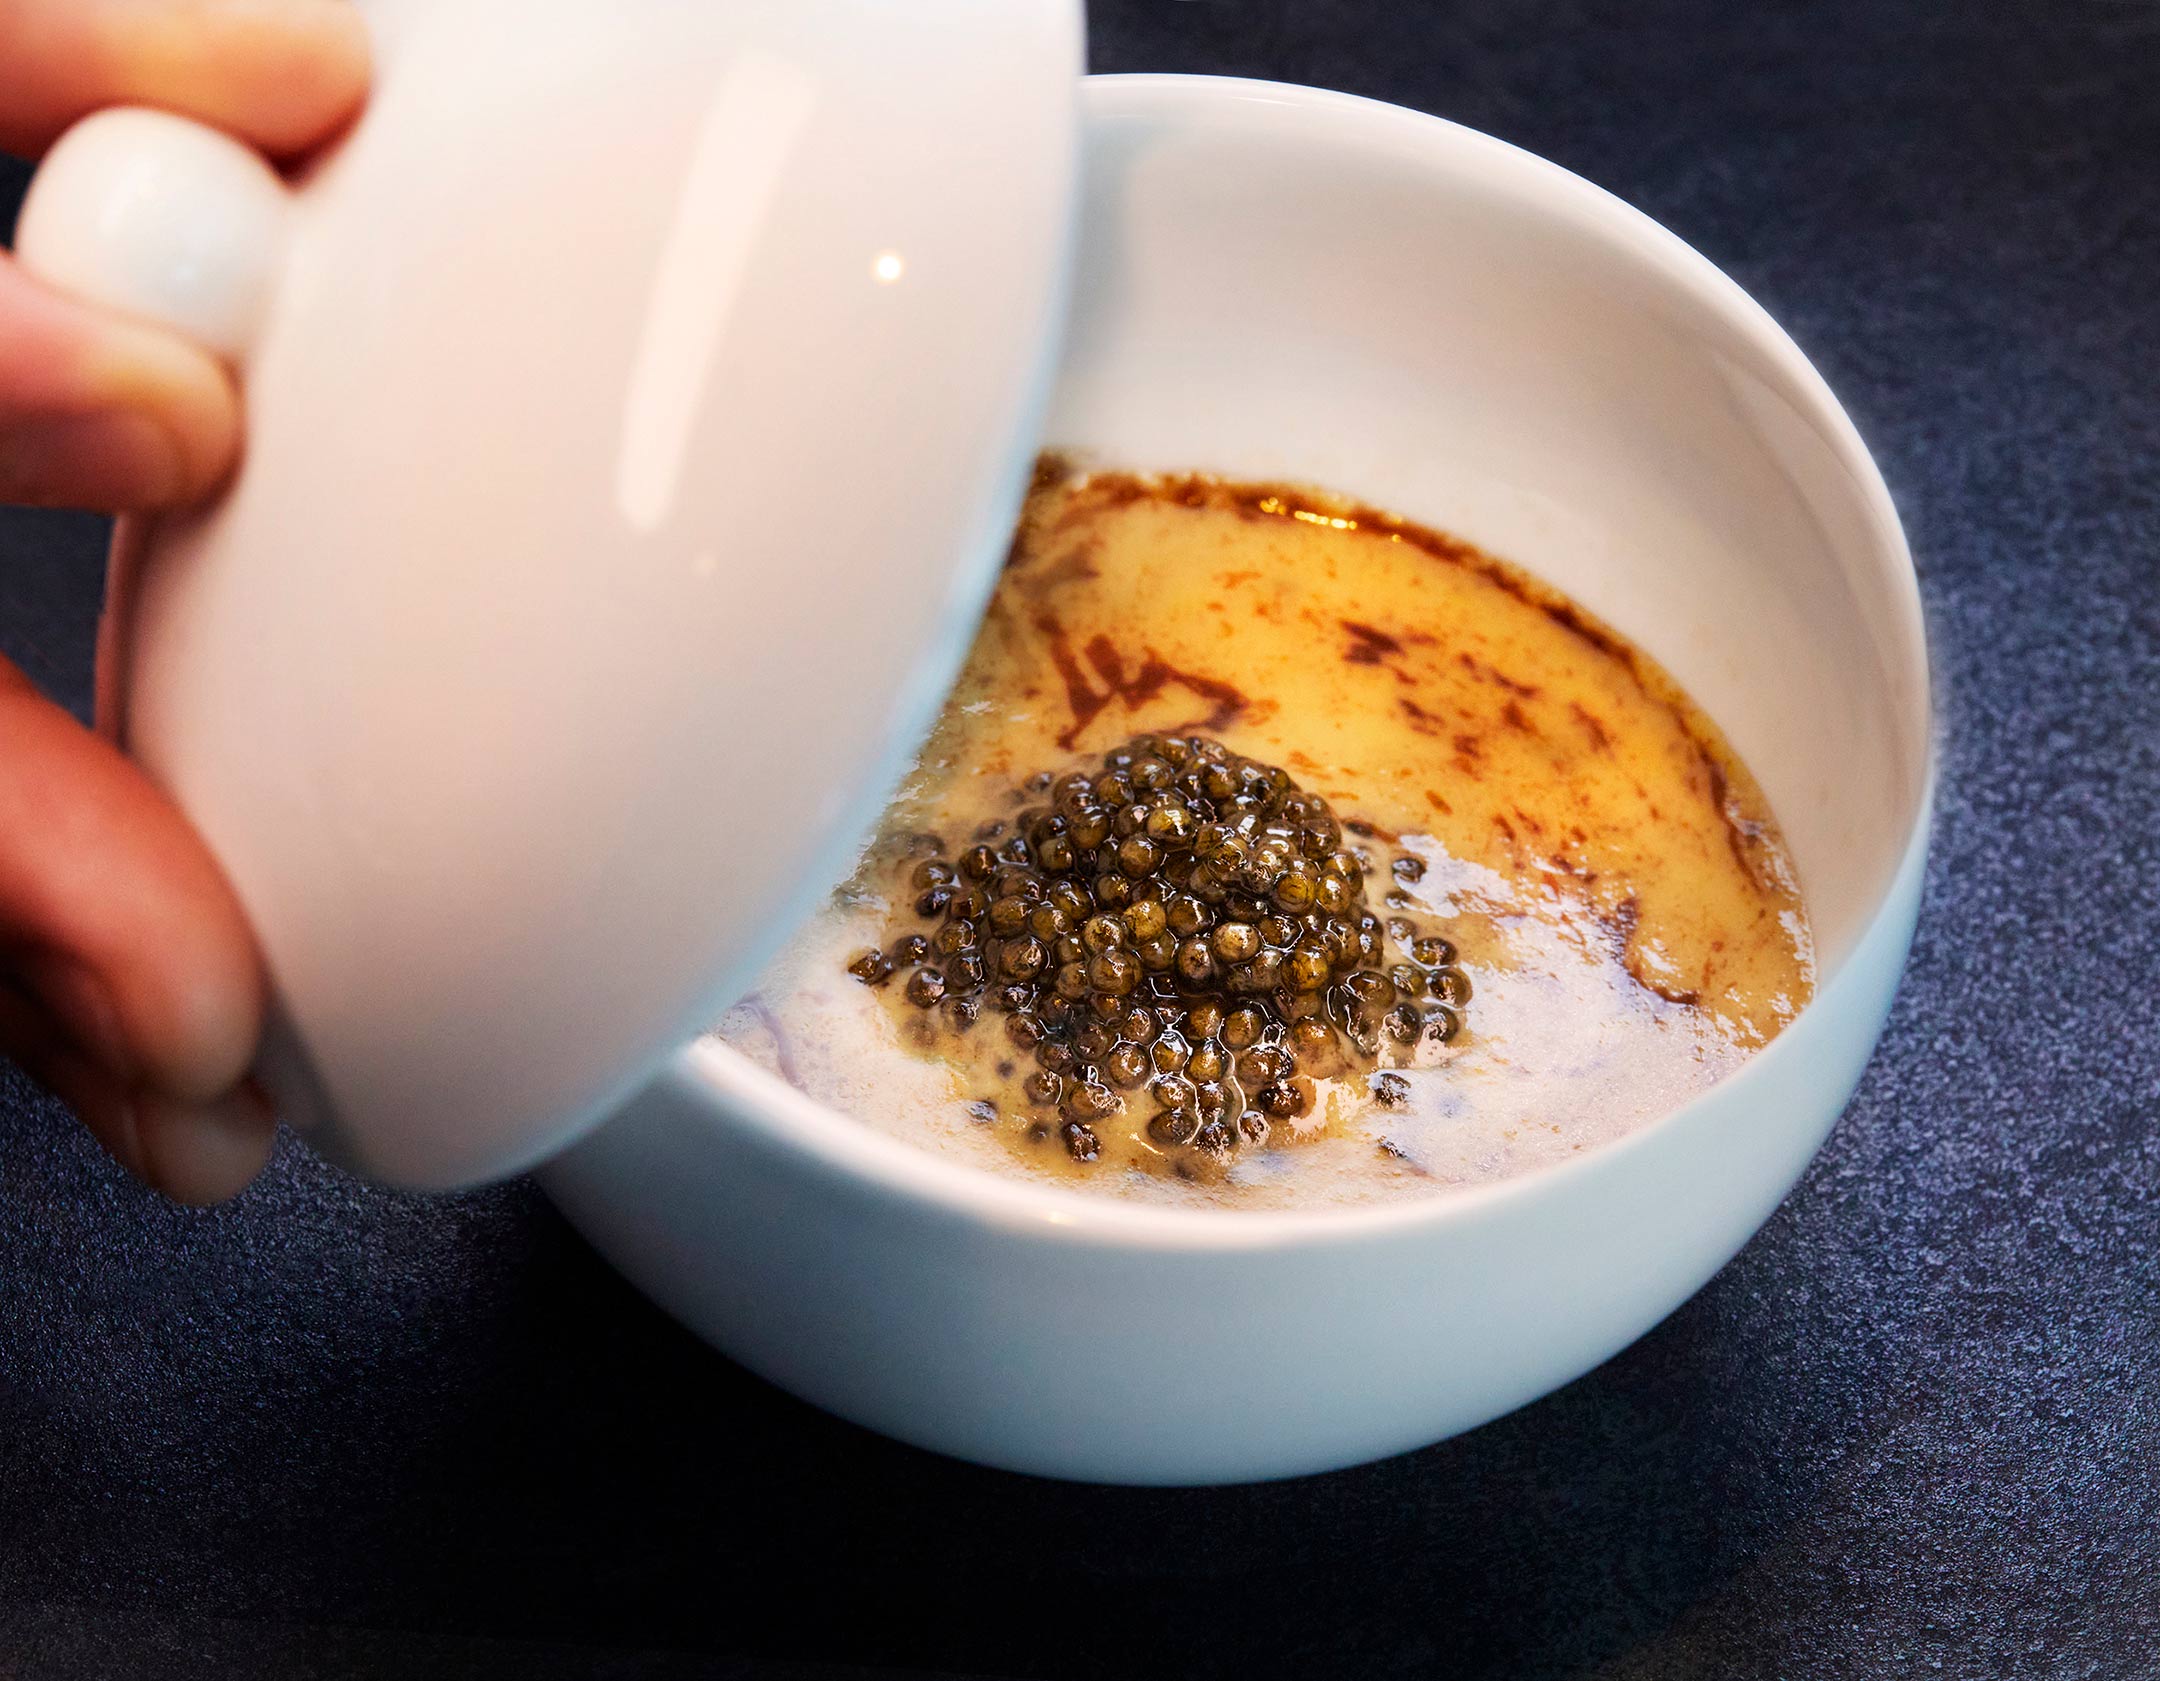 A warm custard of parsnip served along side Royal White Sturgeon and grilled runner peanut oil pressed by The Lab at Audrey Nashville